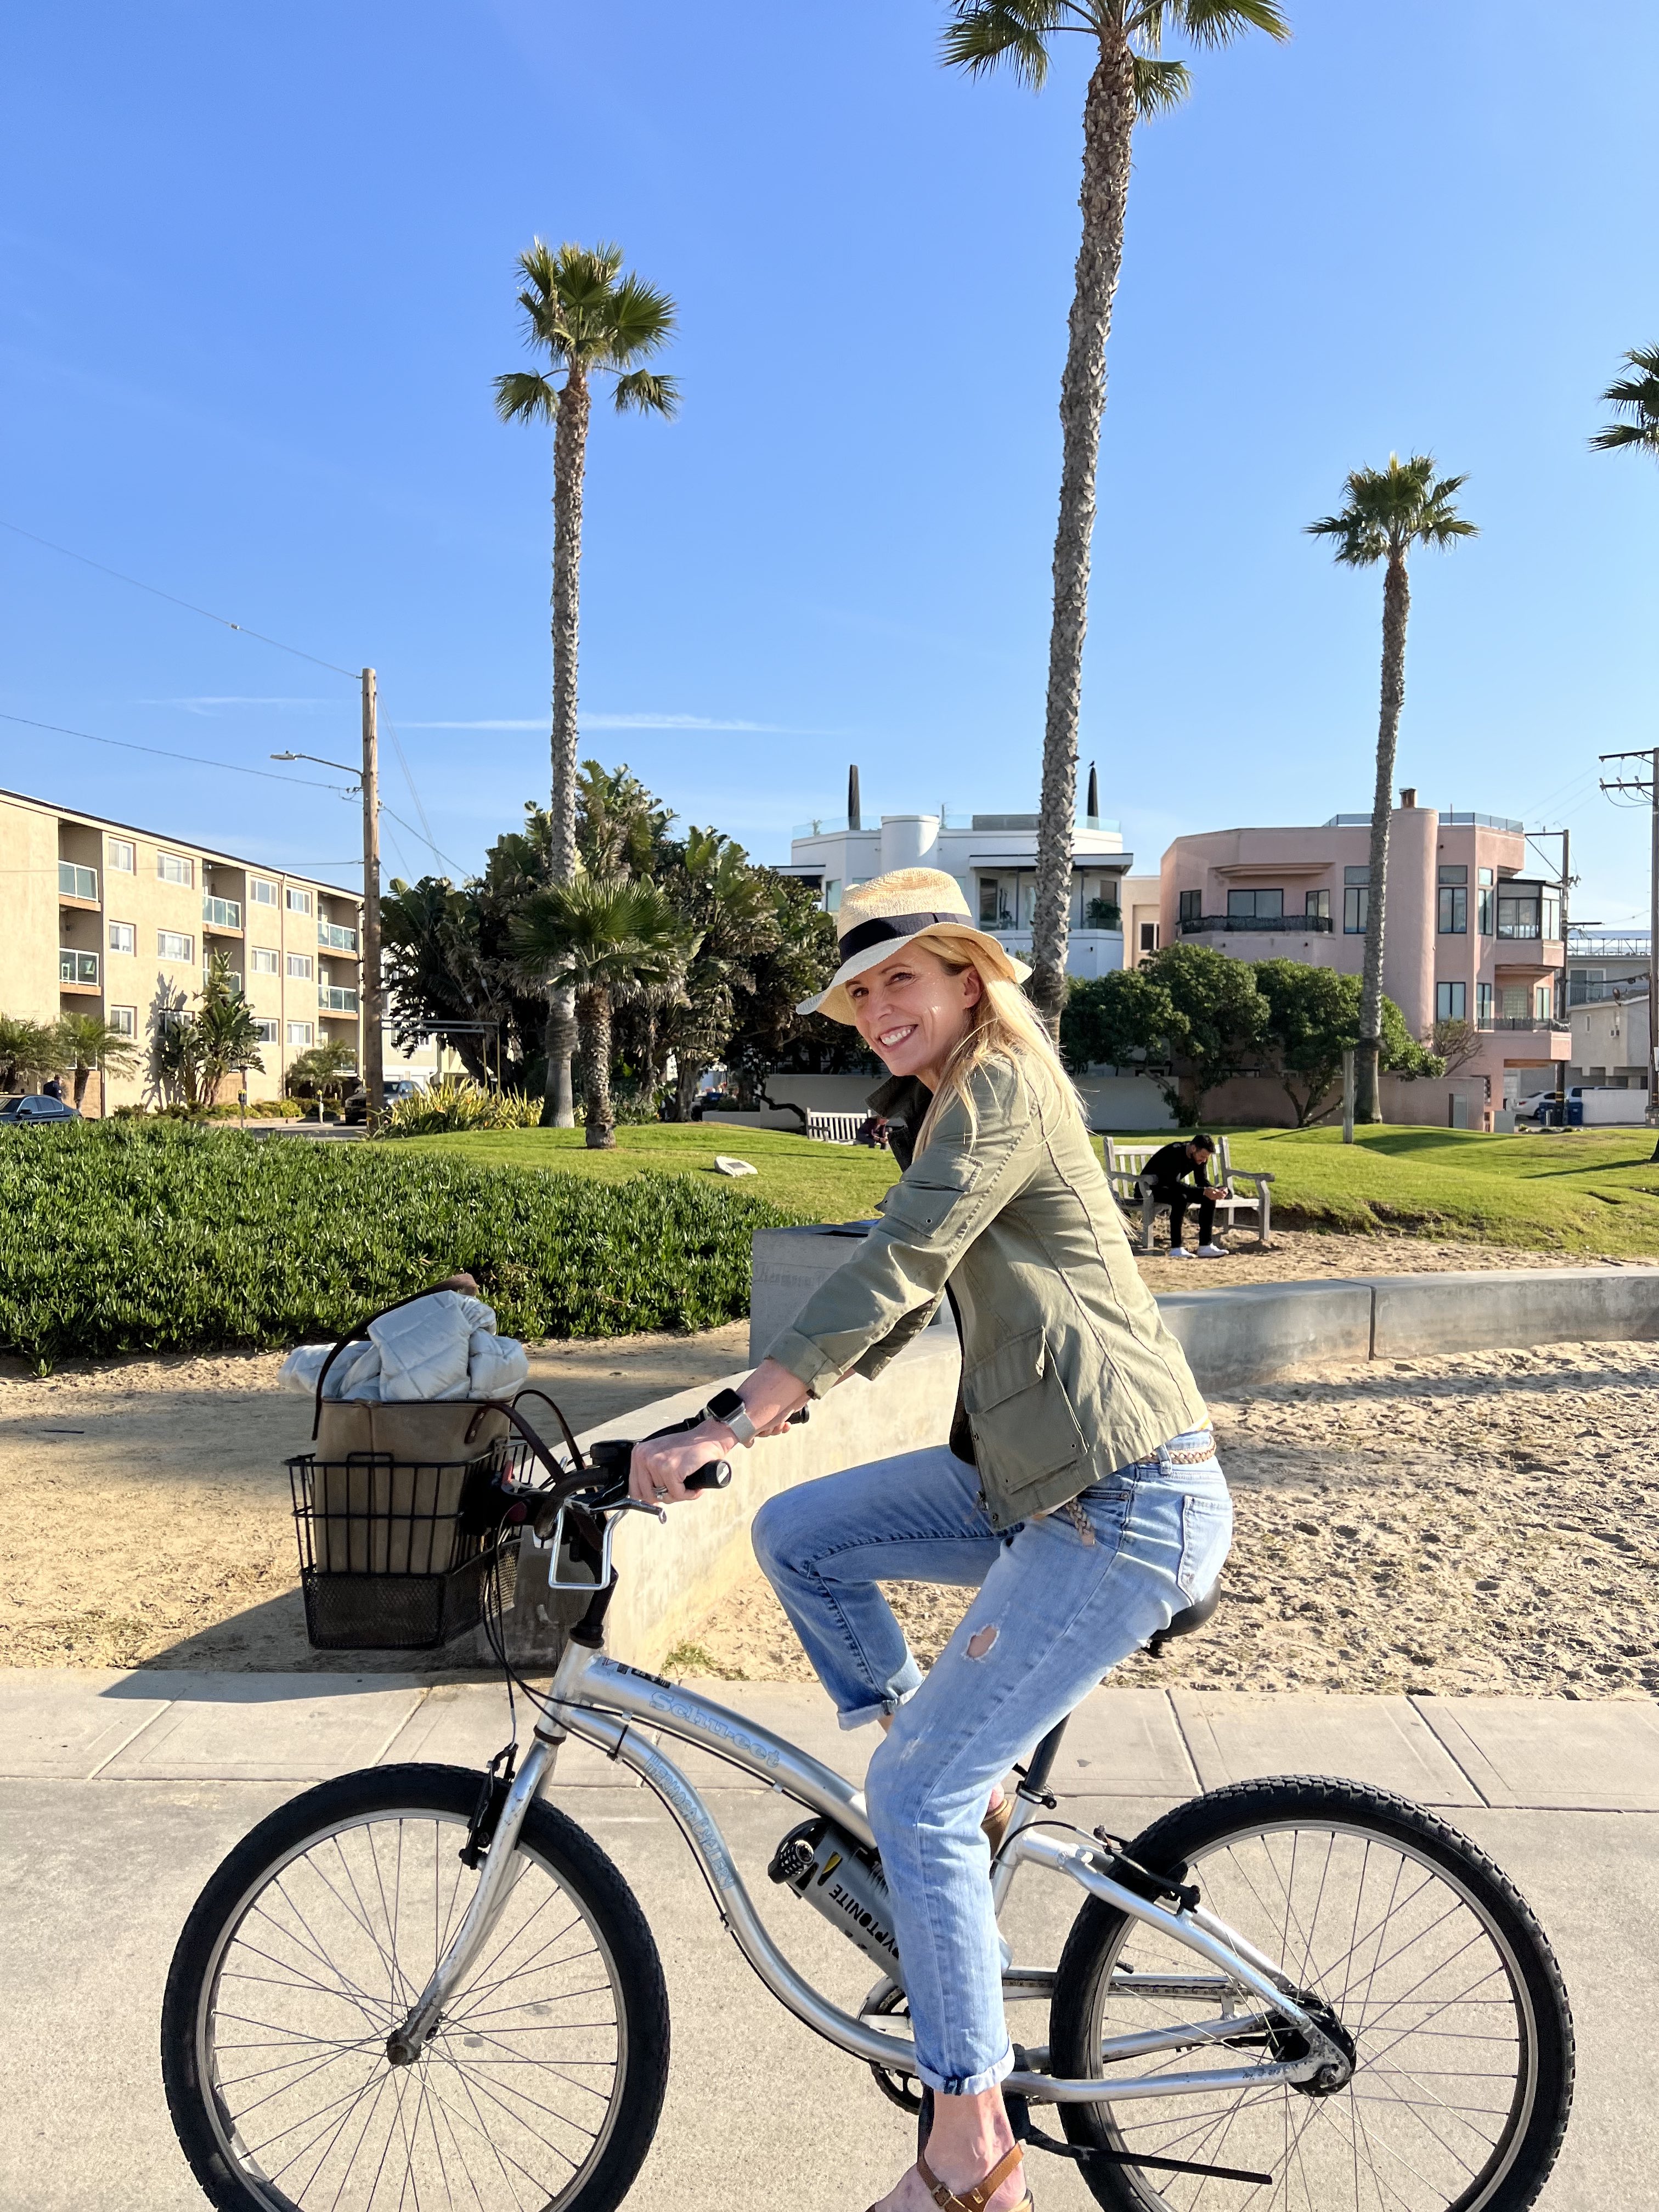 Image of Katie Hetrick on a bike in southern California.